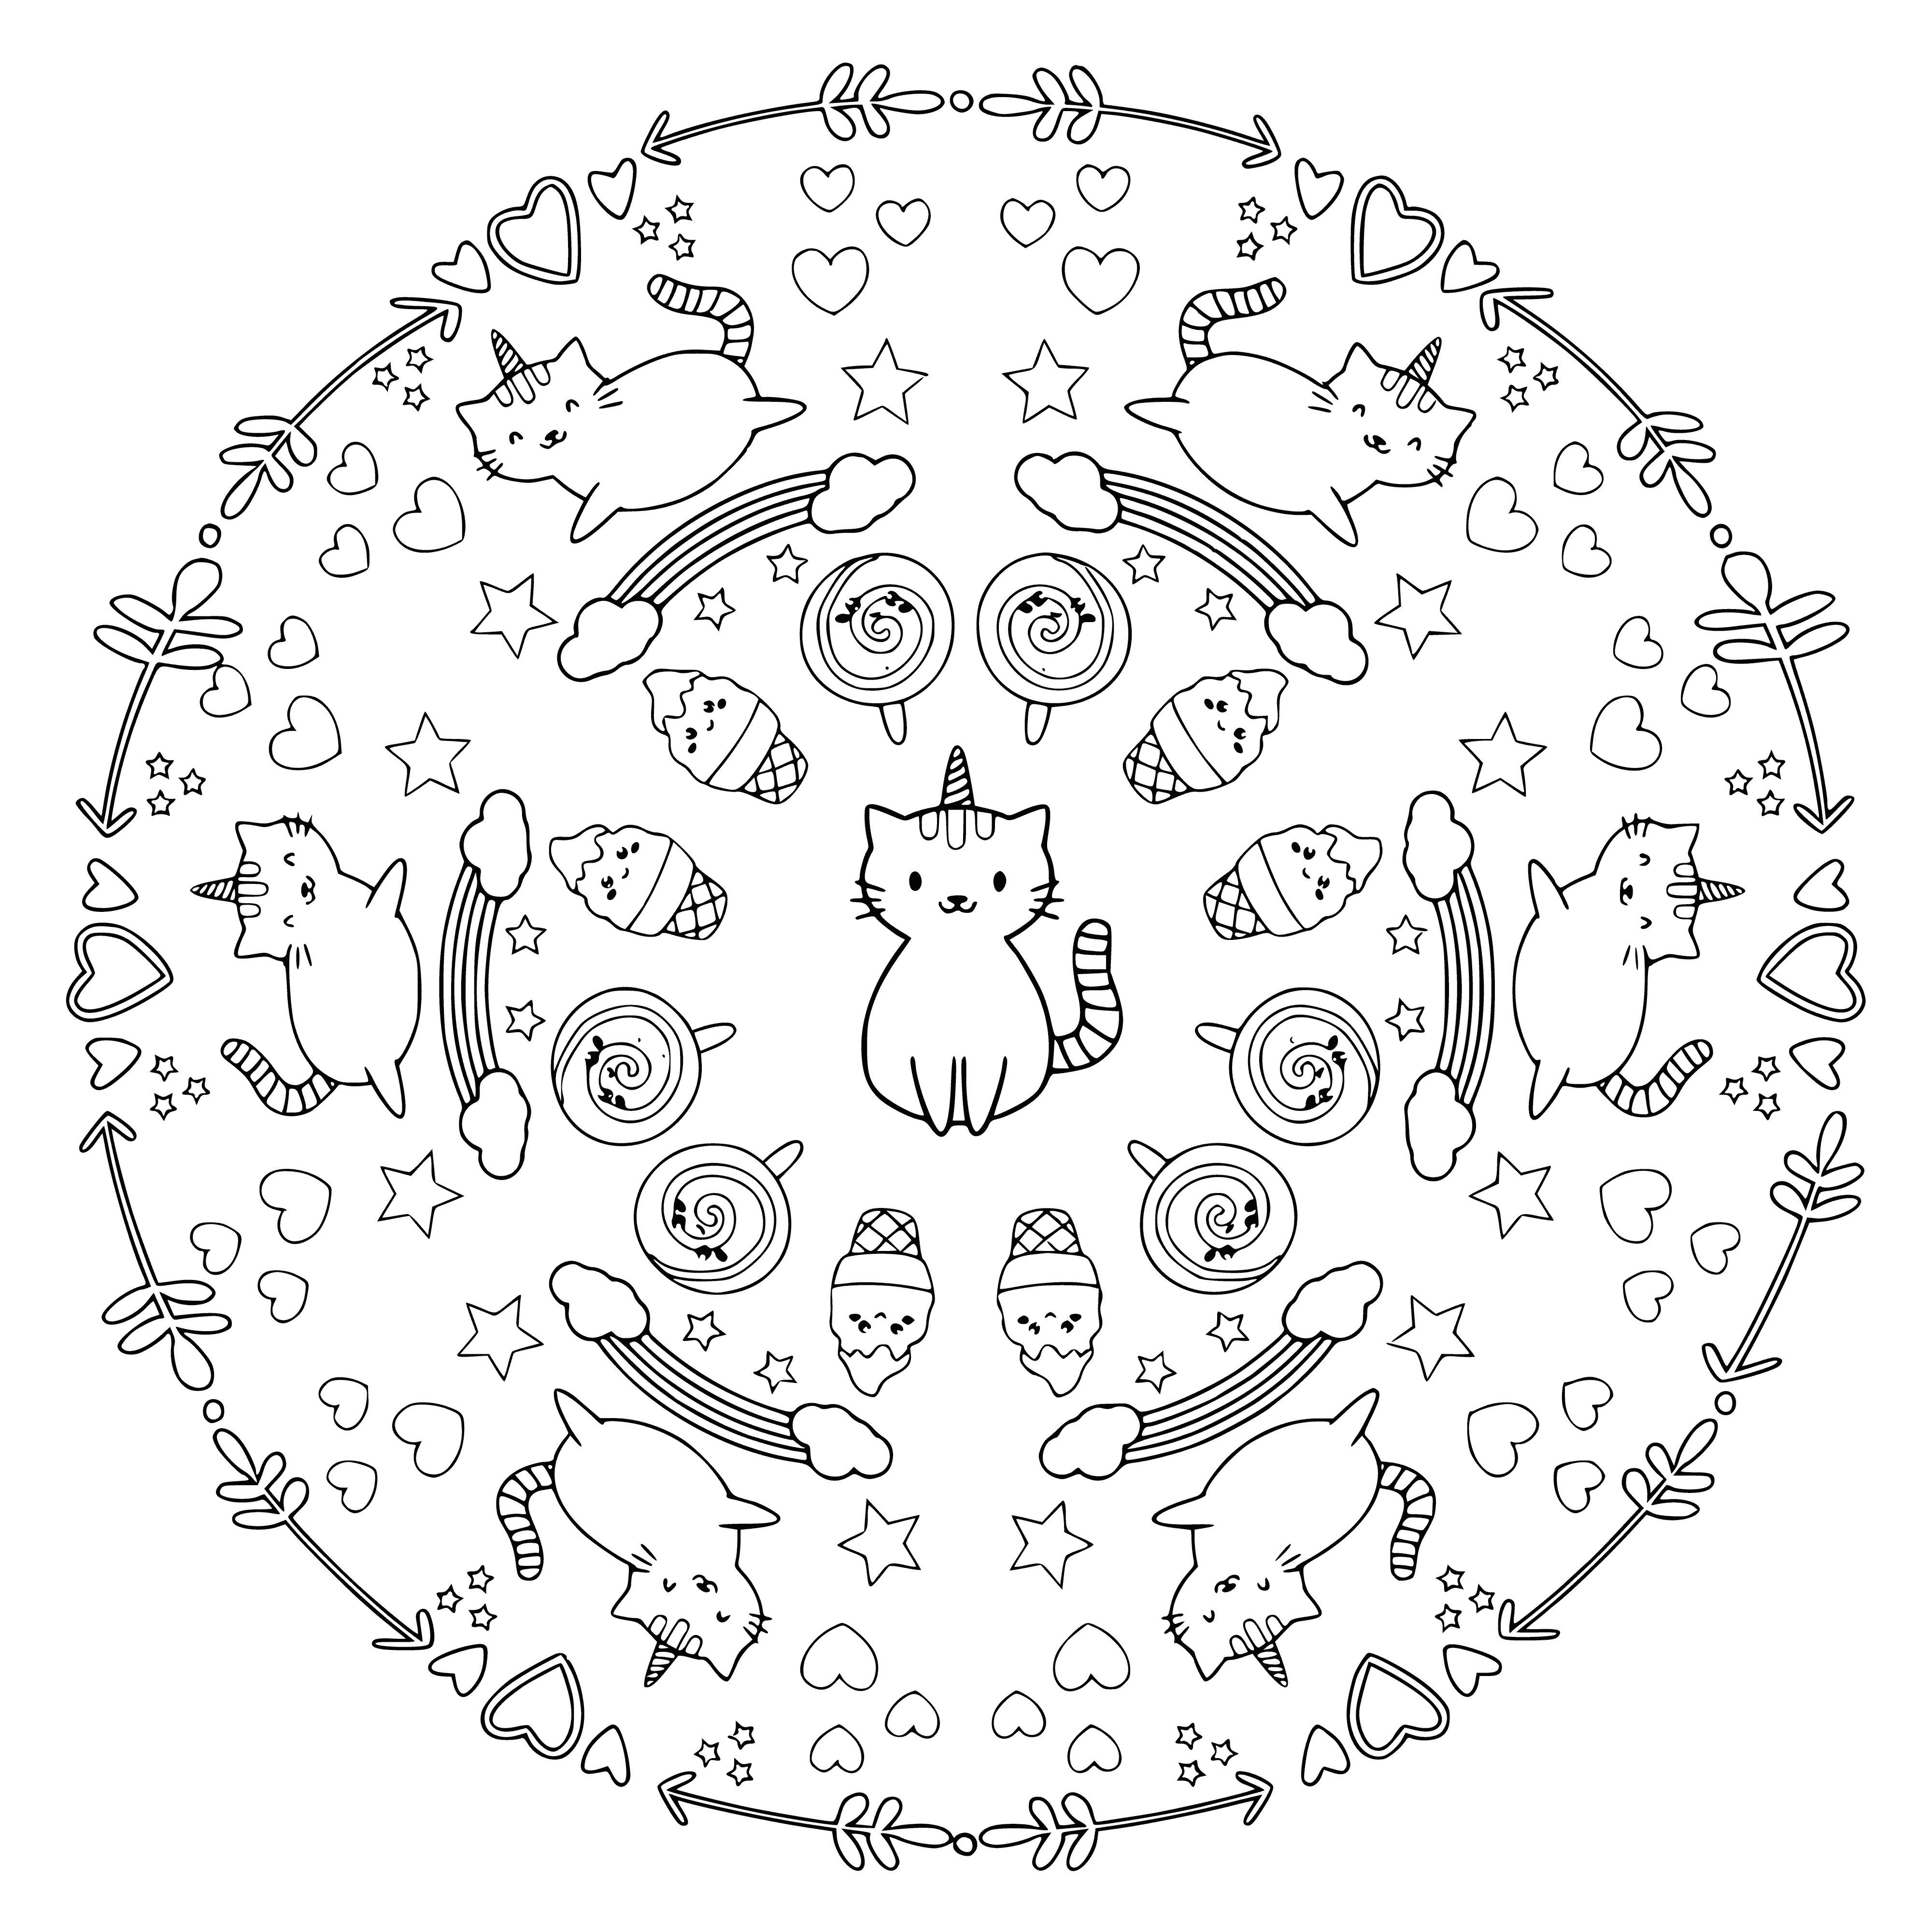 coloring page: Colorful cats in mandala; center has big cat surrounded by smaller cats in intricate design. #cats #mandala #coloring